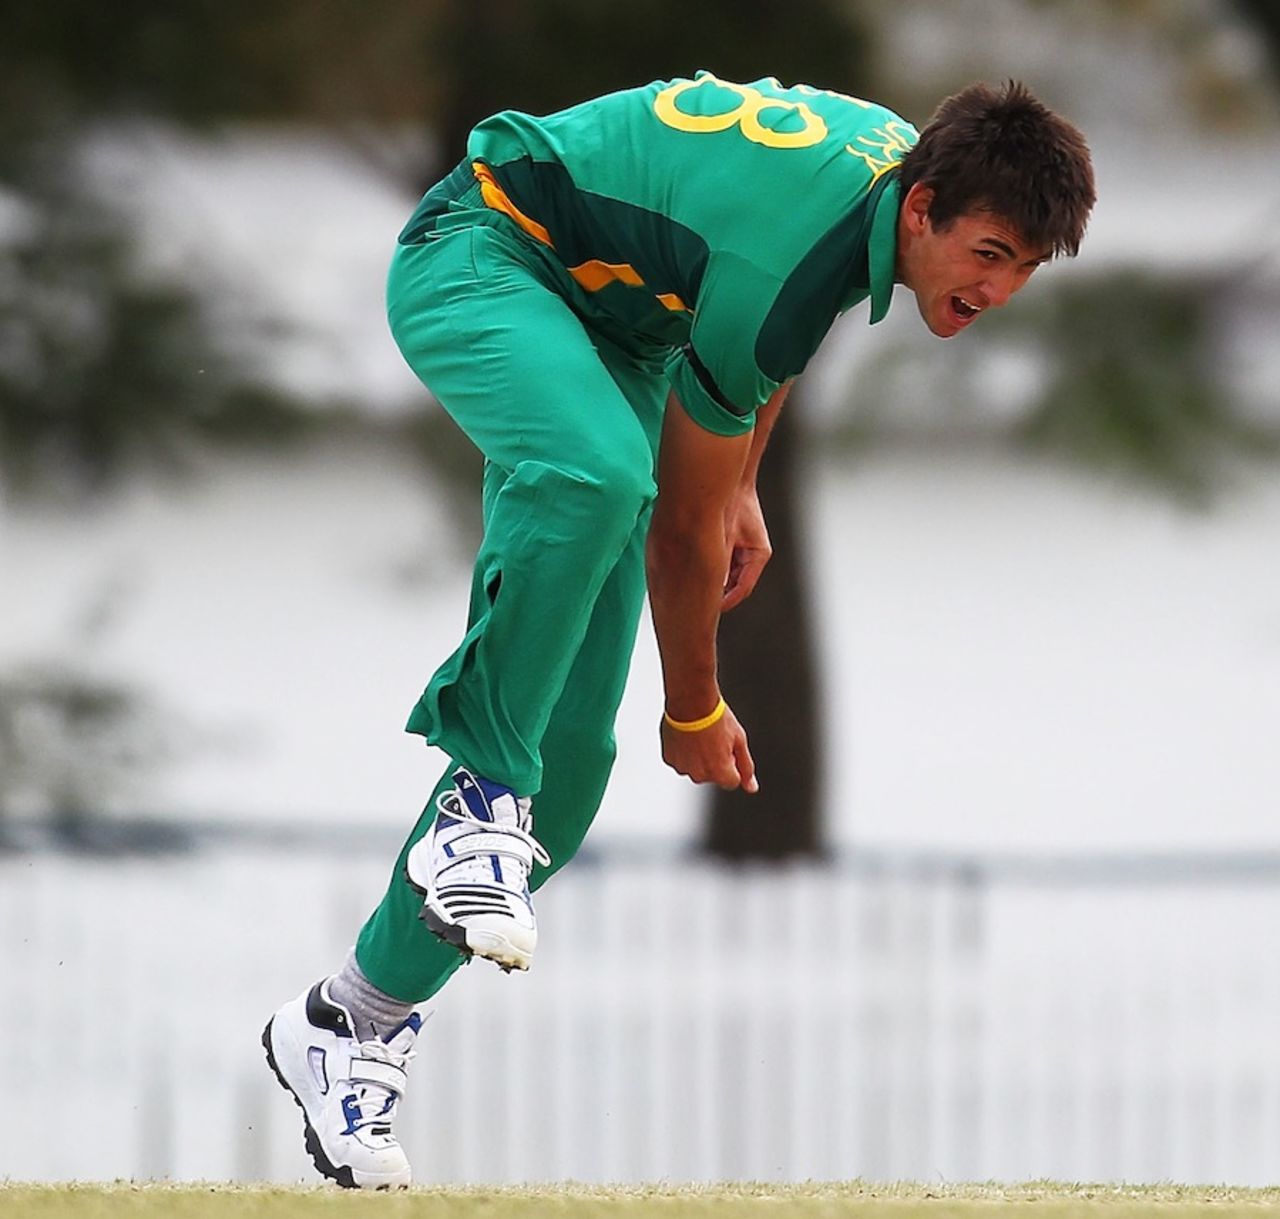 Corne Dry in his follow-through, South Africa v Bangladesh, Group D, ICC Under-19 World Cup 2012, Brisbane, August 12, 2012